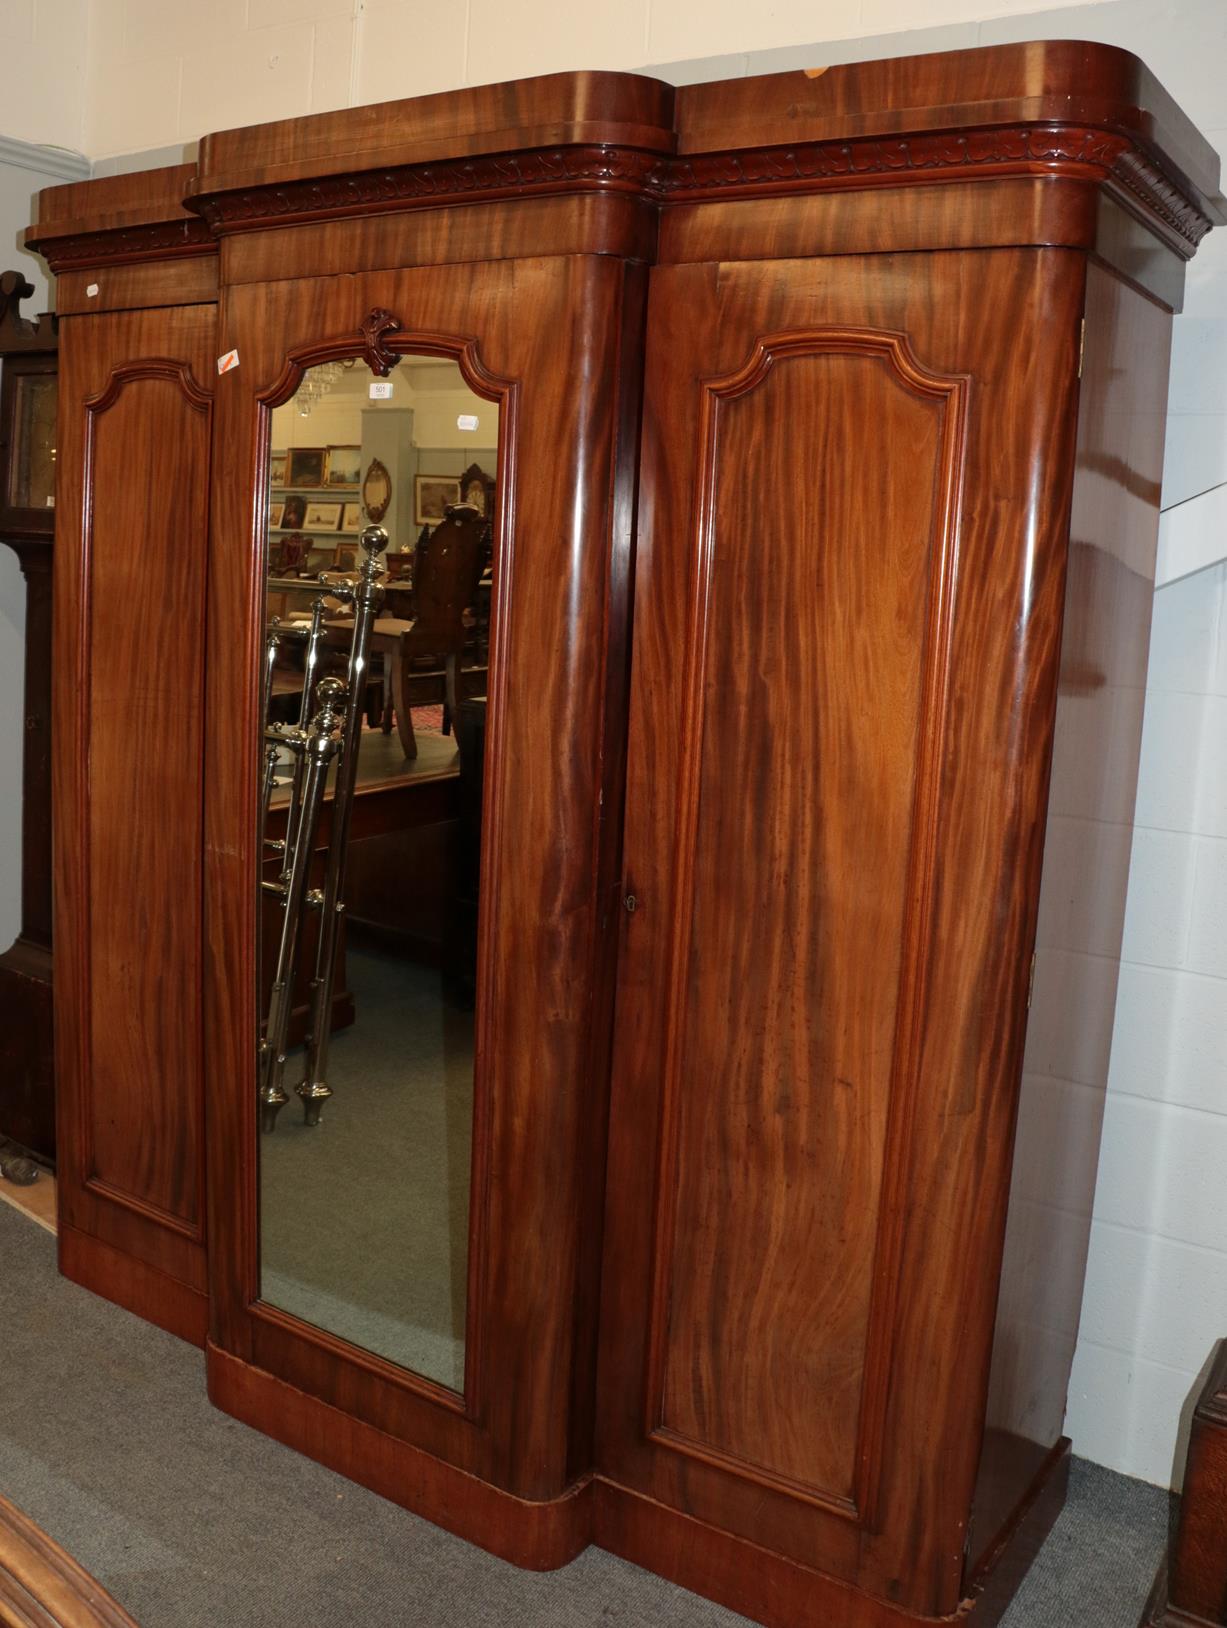 ^ A substantial Victorian breakfront mirrored triple door wardrobe with fully fitted and lined